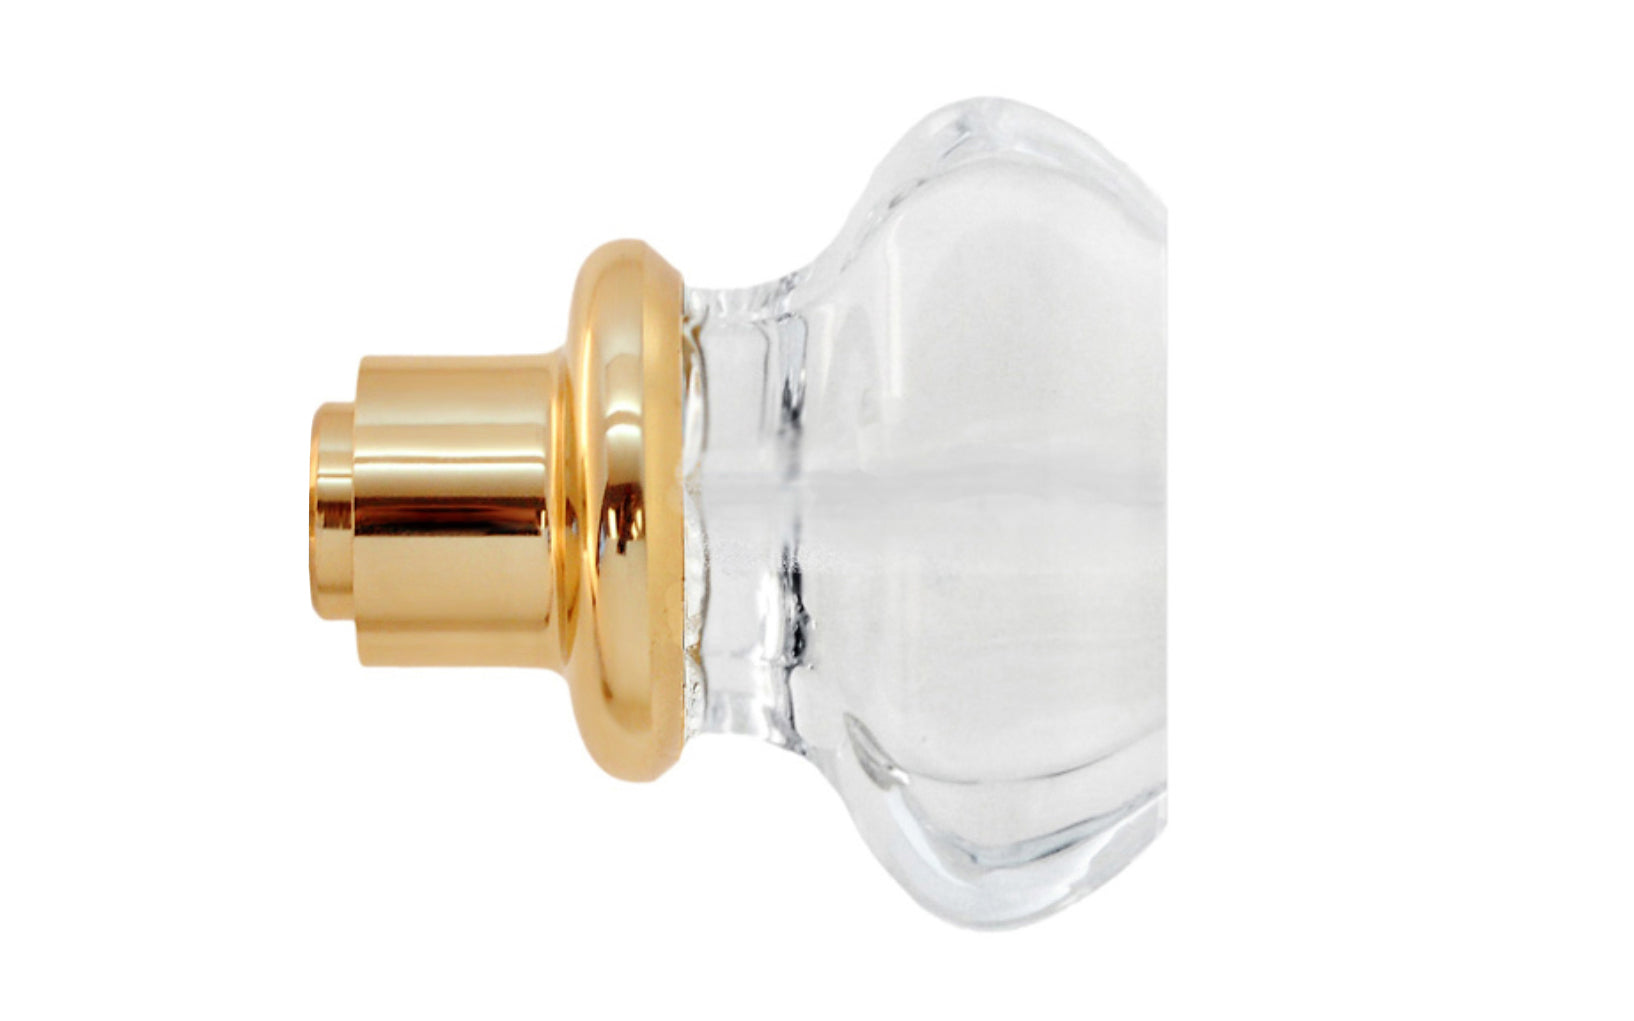 Single Classic Octagonal Clear Glass Doorknob. A high quality & genuine glass doorknob with an attractive Octagon design. The sparkling center point under glass amplifies reflected light to showcase beautiful facets. Solid brass base. Reproduction Glass Door Knobs. Traditional Octagonal Glass Knobs. One knob. Unlacquered brass (will patina naturally), Non-Lacquered Brass.